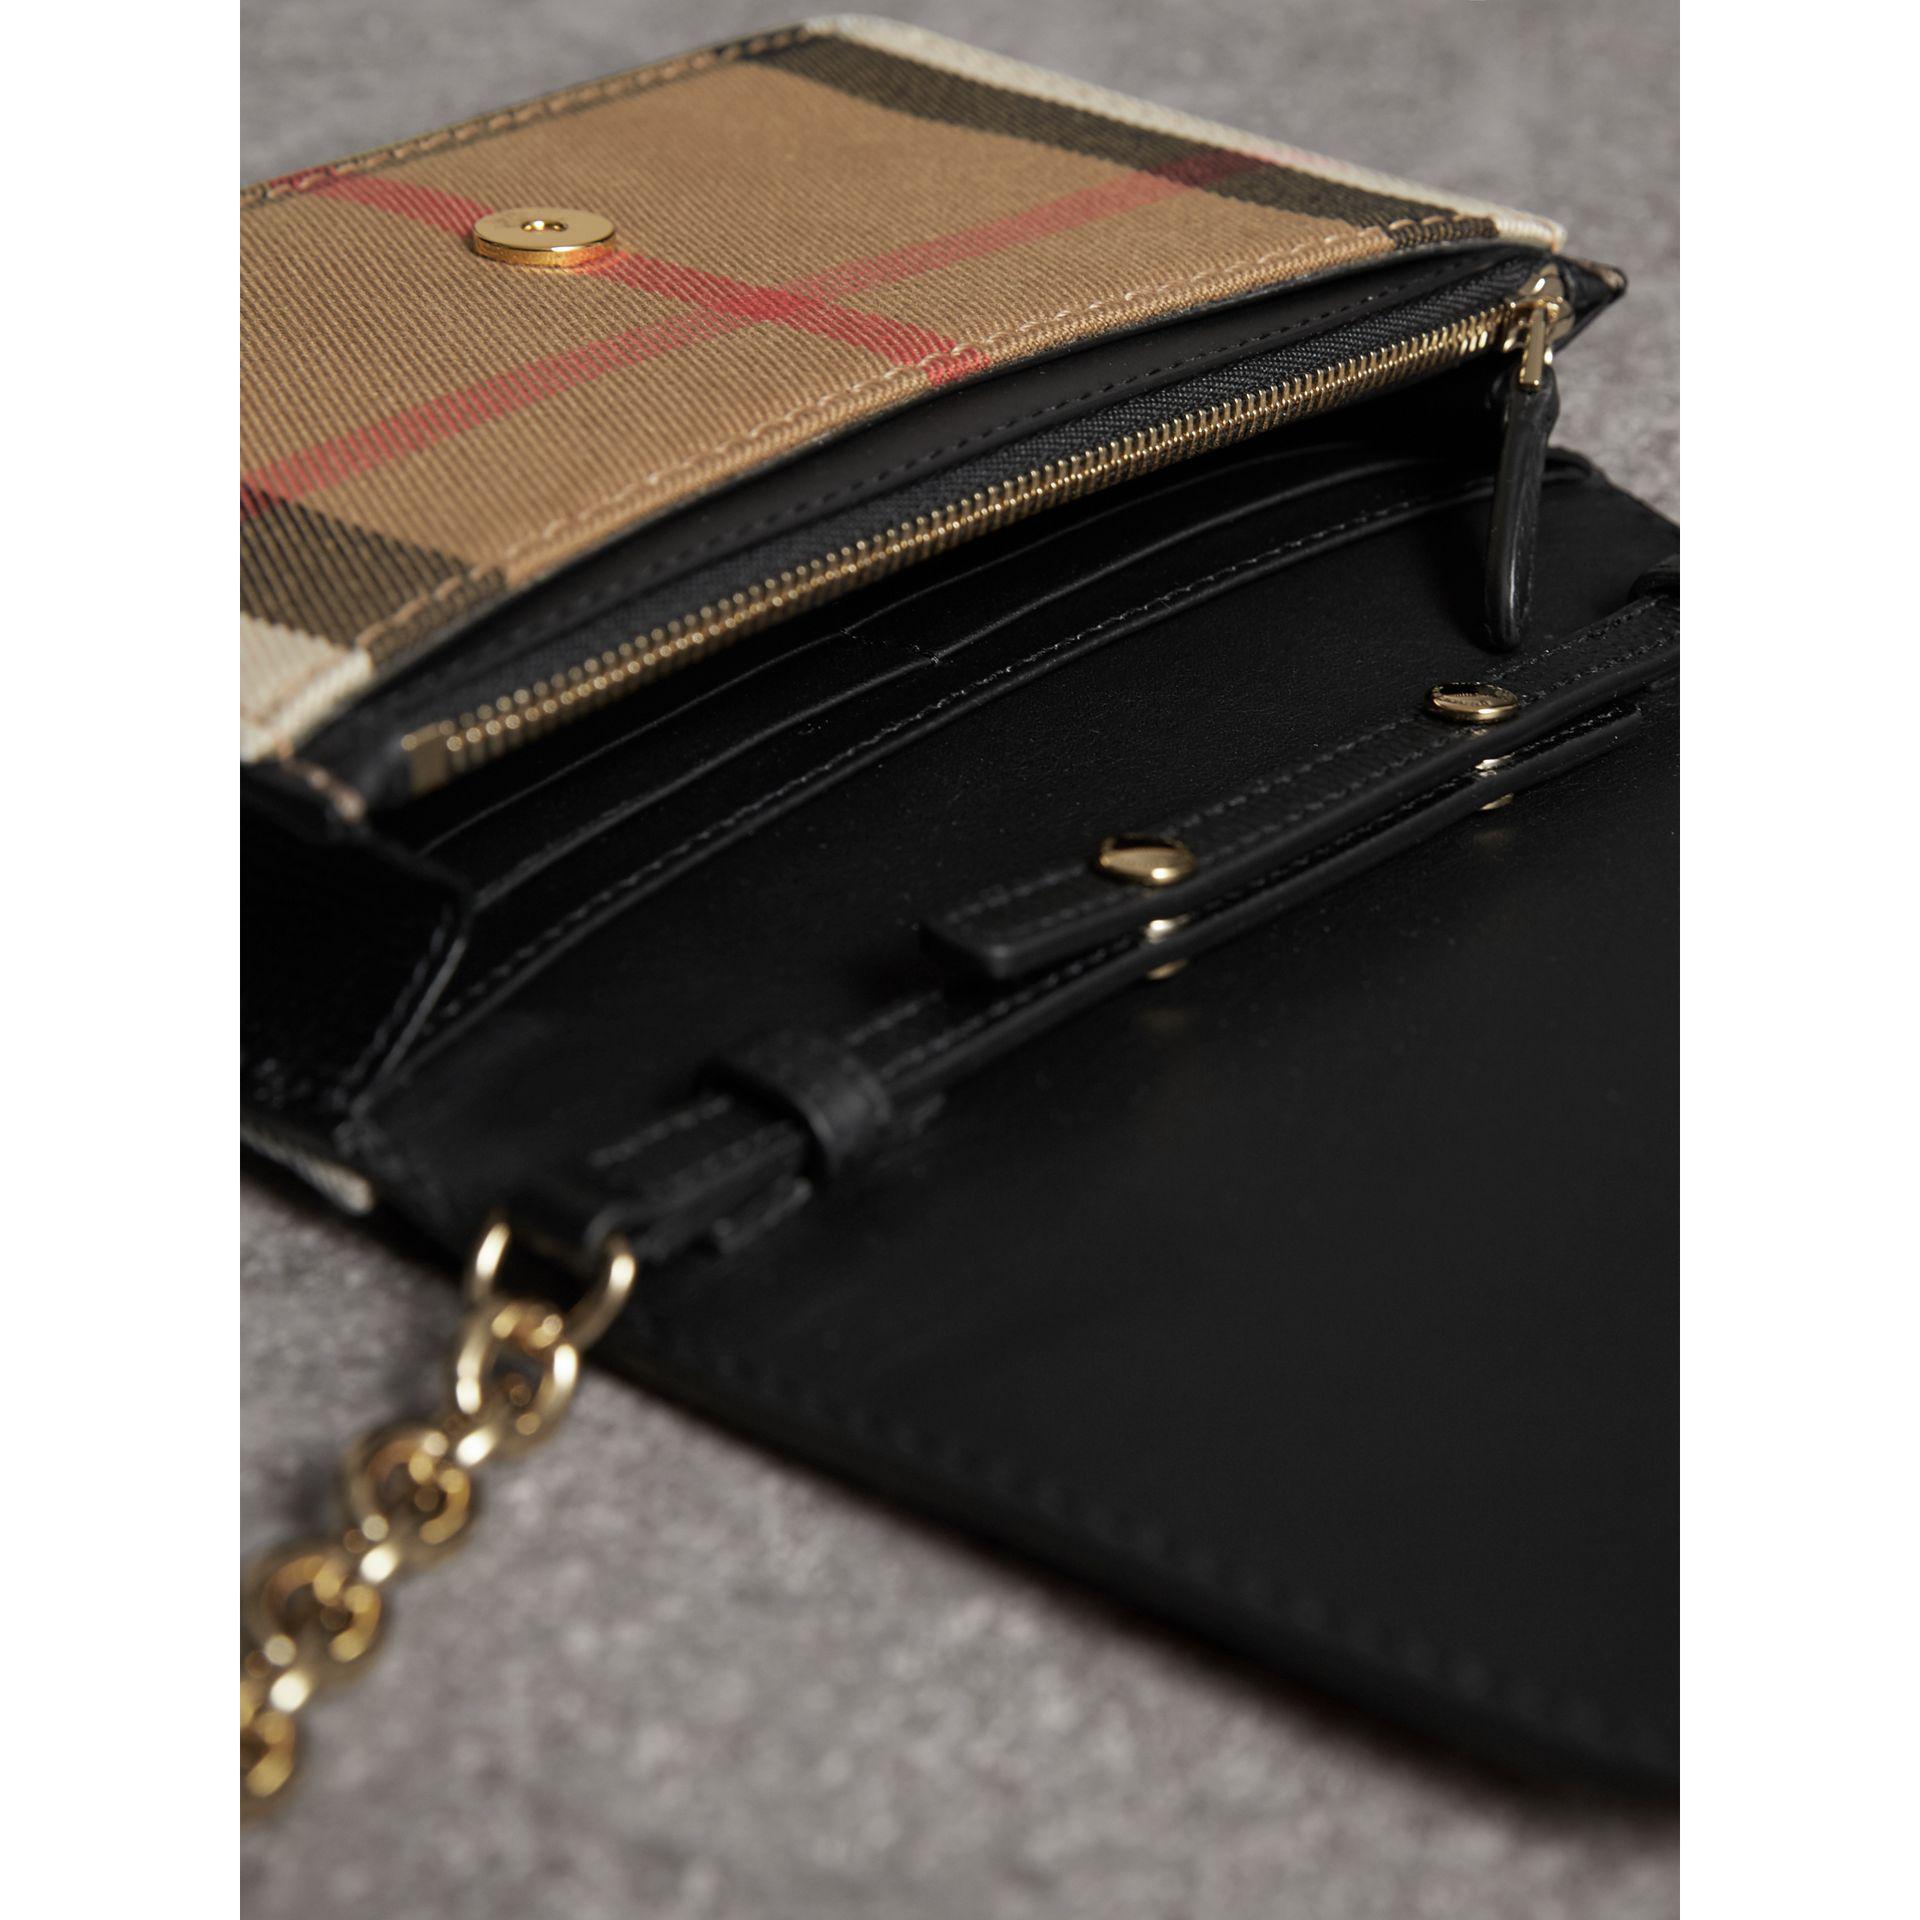 UNBOXING BURBERRY VINTAGE CHECK CARD CASE WITH DETACHABLE STRAP